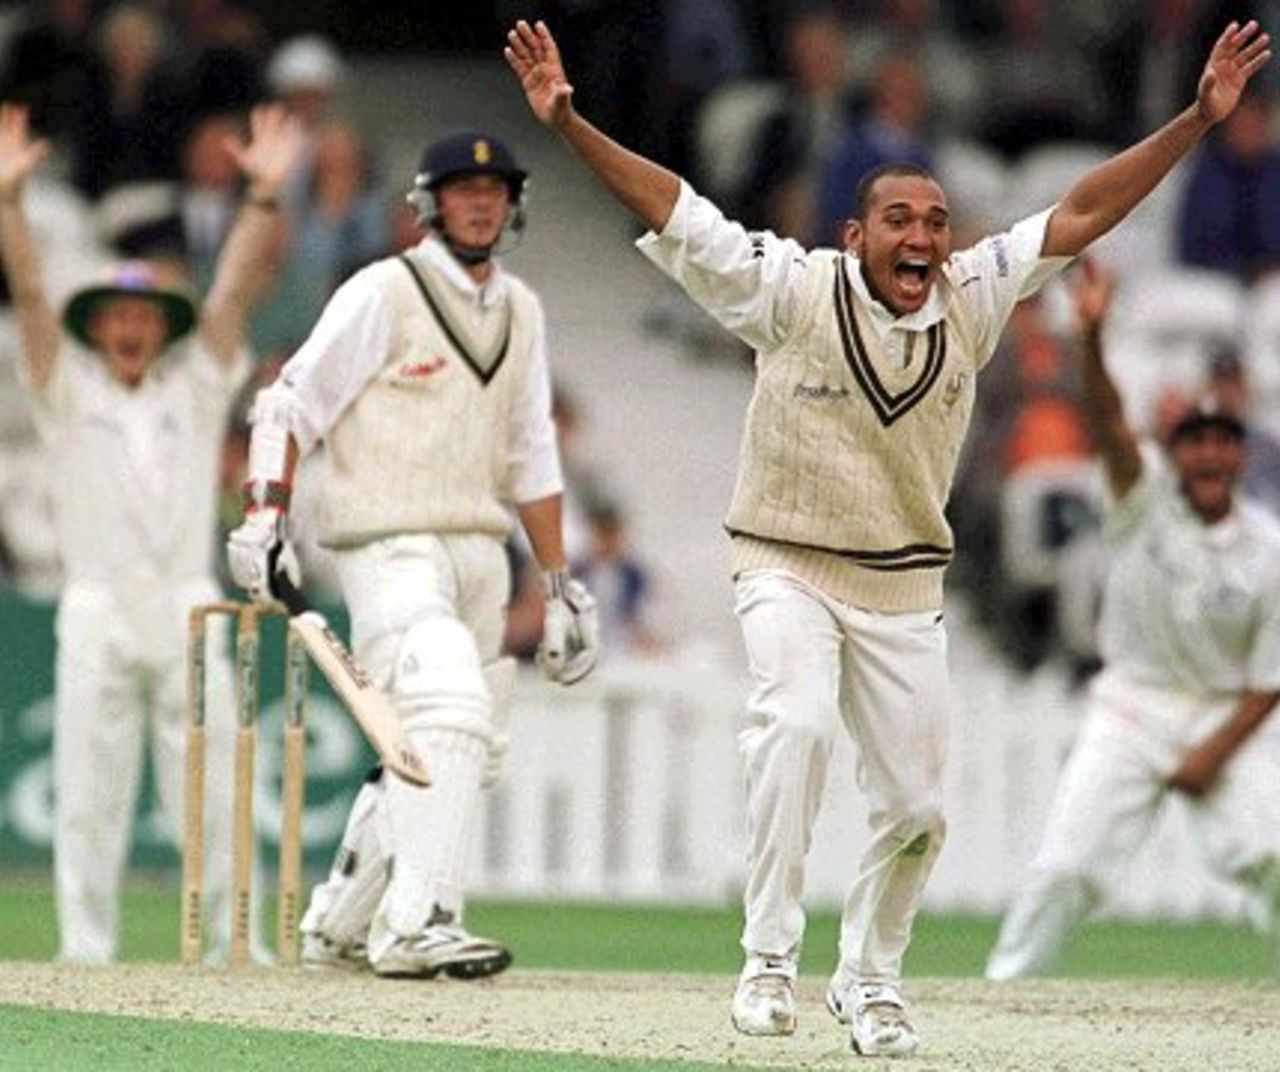 16 Aug 2000: Gary Butcher of Surrey appeals successfully for leg before wicket against Liam Wharton of Derbyshire, thus achieving four wickets in four balls, on the first day of the PPP Healthcare Division One County Championship match at the Oval in London.